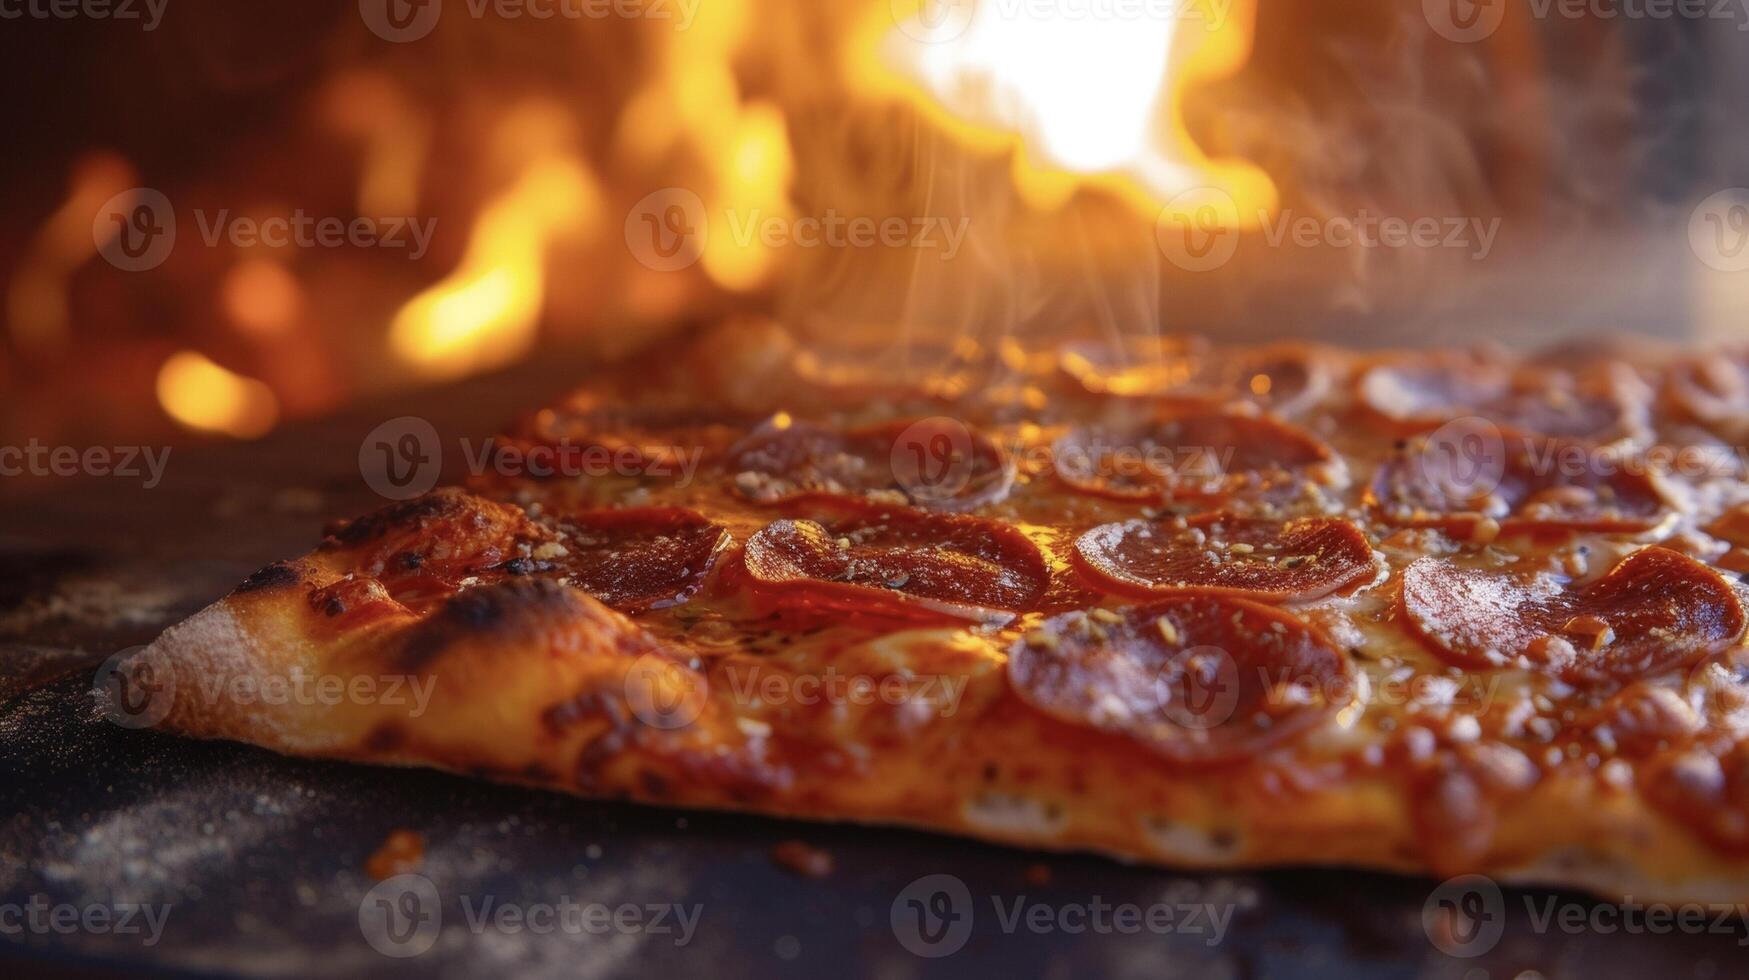 Glistening pepperoni slices sizzle atop a perfectly cooked pizza slice surrounded by the smoky backdrop of a woodfired oven photo